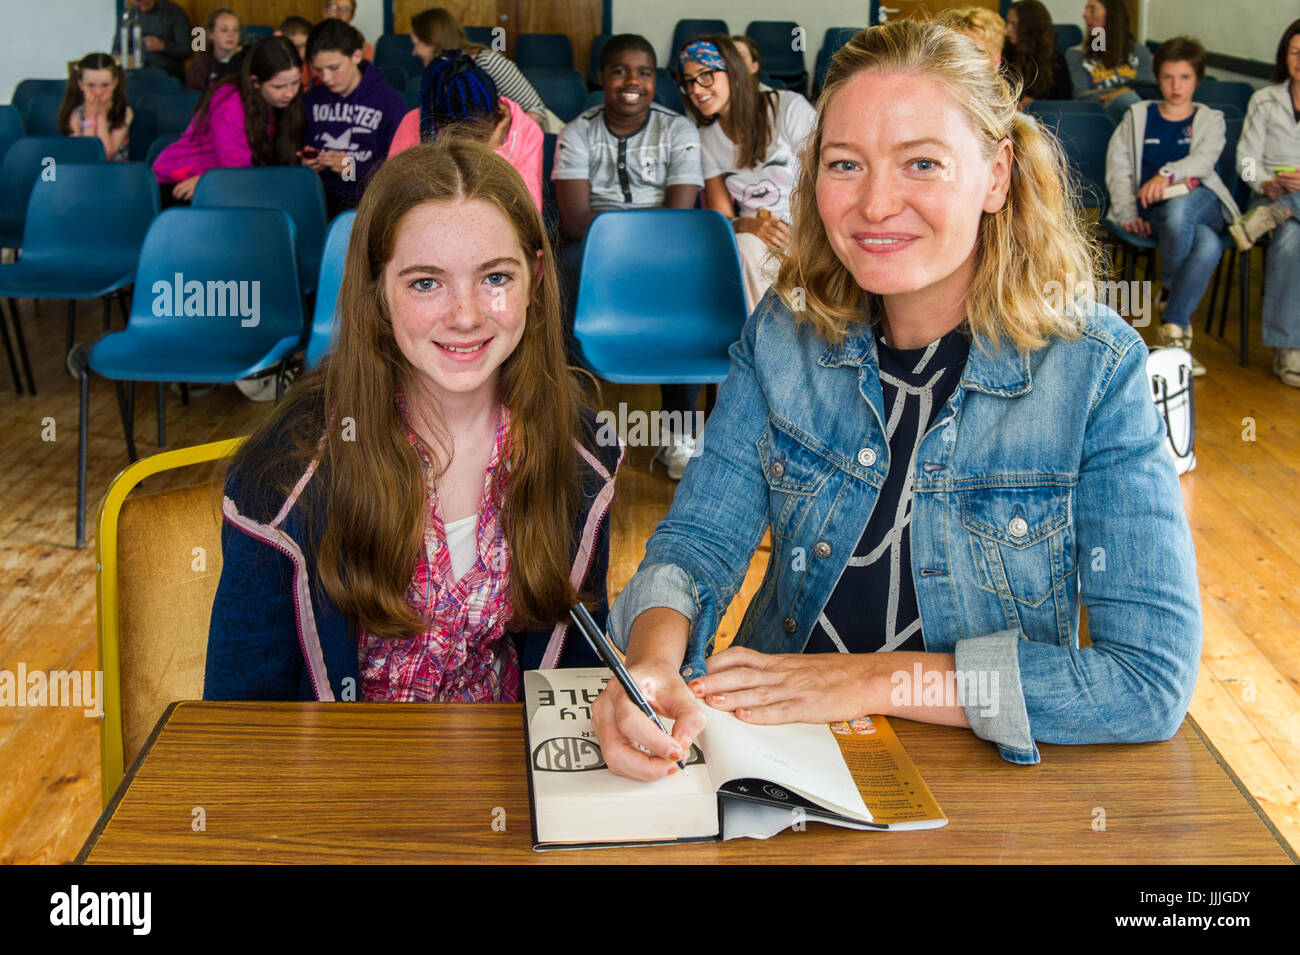 Bantry, West Cork, Ireland. 20th July, 2017.  Award-winning Geek Girl series children's book author, Holly Smale was in Bantry today to do a reading from her new book 'Forever Geek'.  As part of her visit, she met the winner of a book review competition, Caitlyn O'Donovan, aged 11 from Drimoleague, West Cork.  Holly is pictured signing Caitlyn's copy of the book. Credit: Andy Gibson/Alamy Live News. Stock Photo